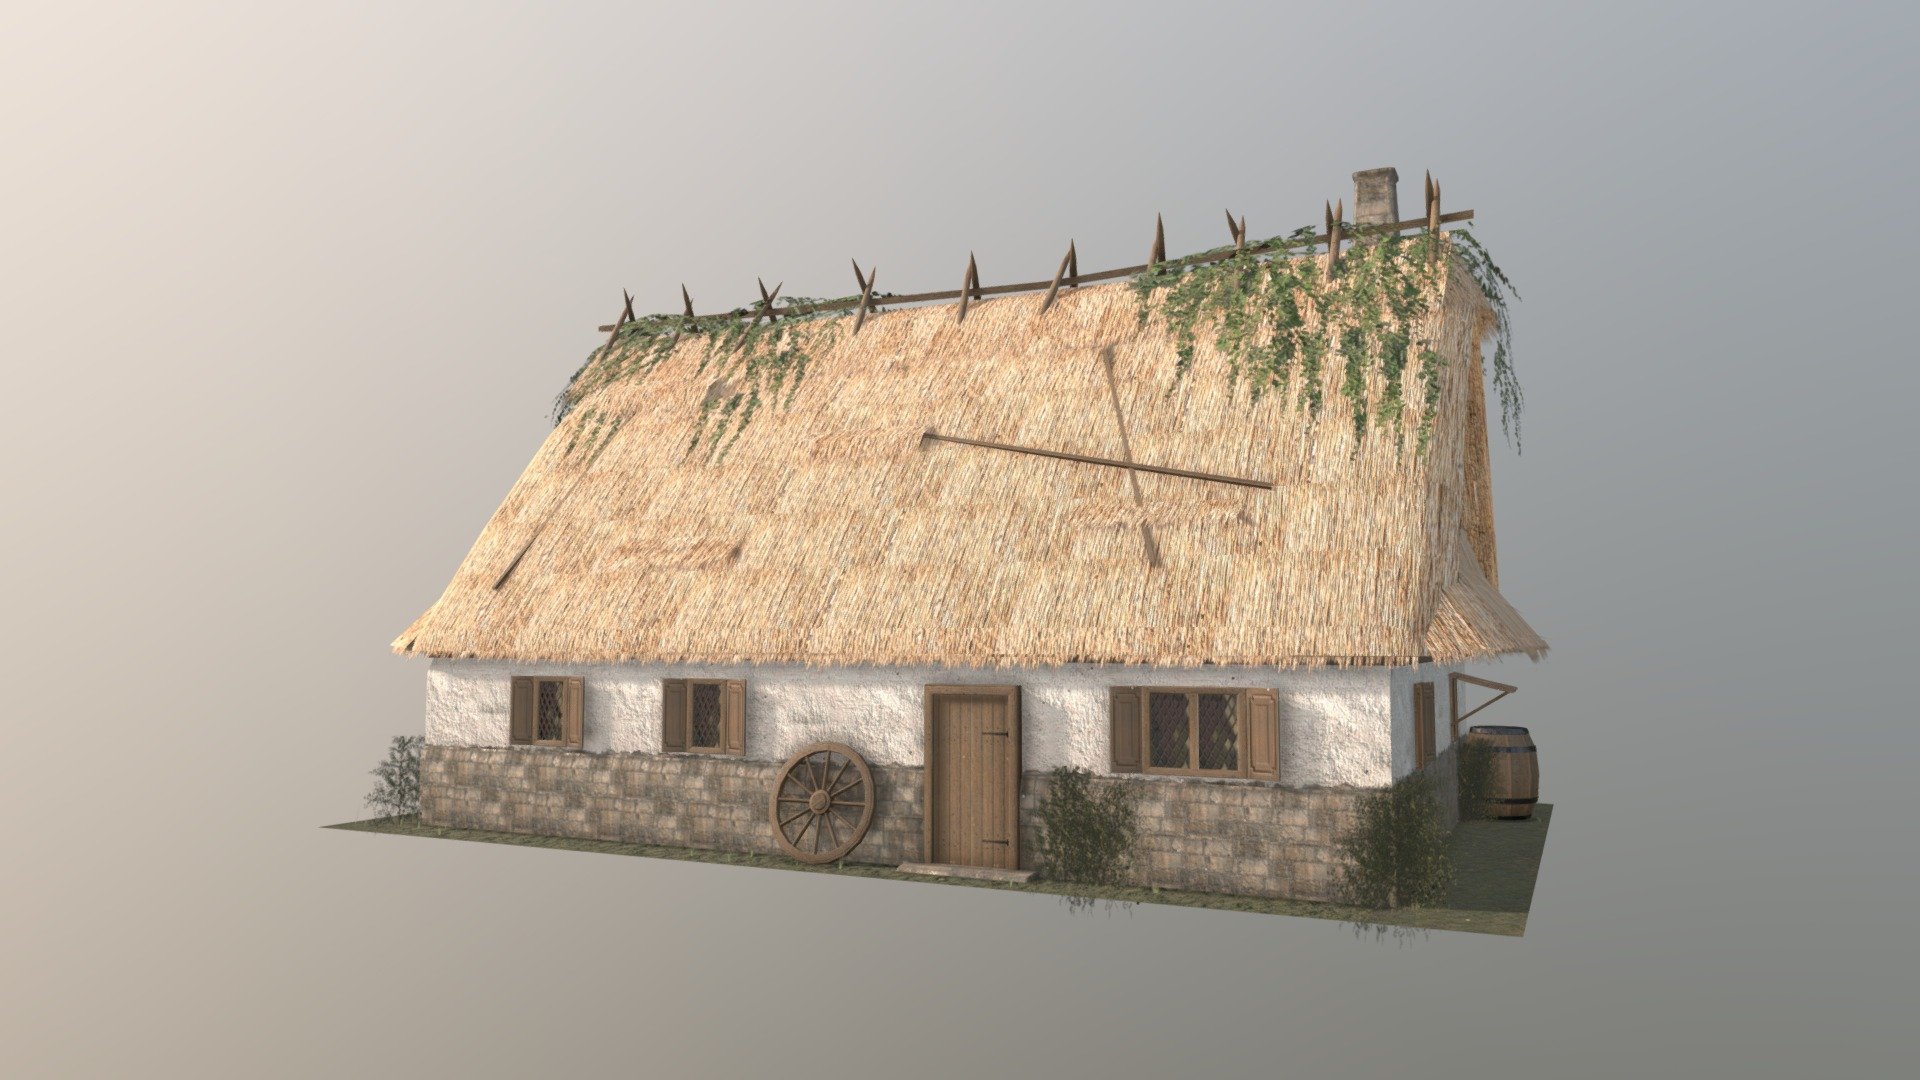 Low poly village hut created as an assignment for my university course. The objective was to utilize trim textures and atlases 3d model